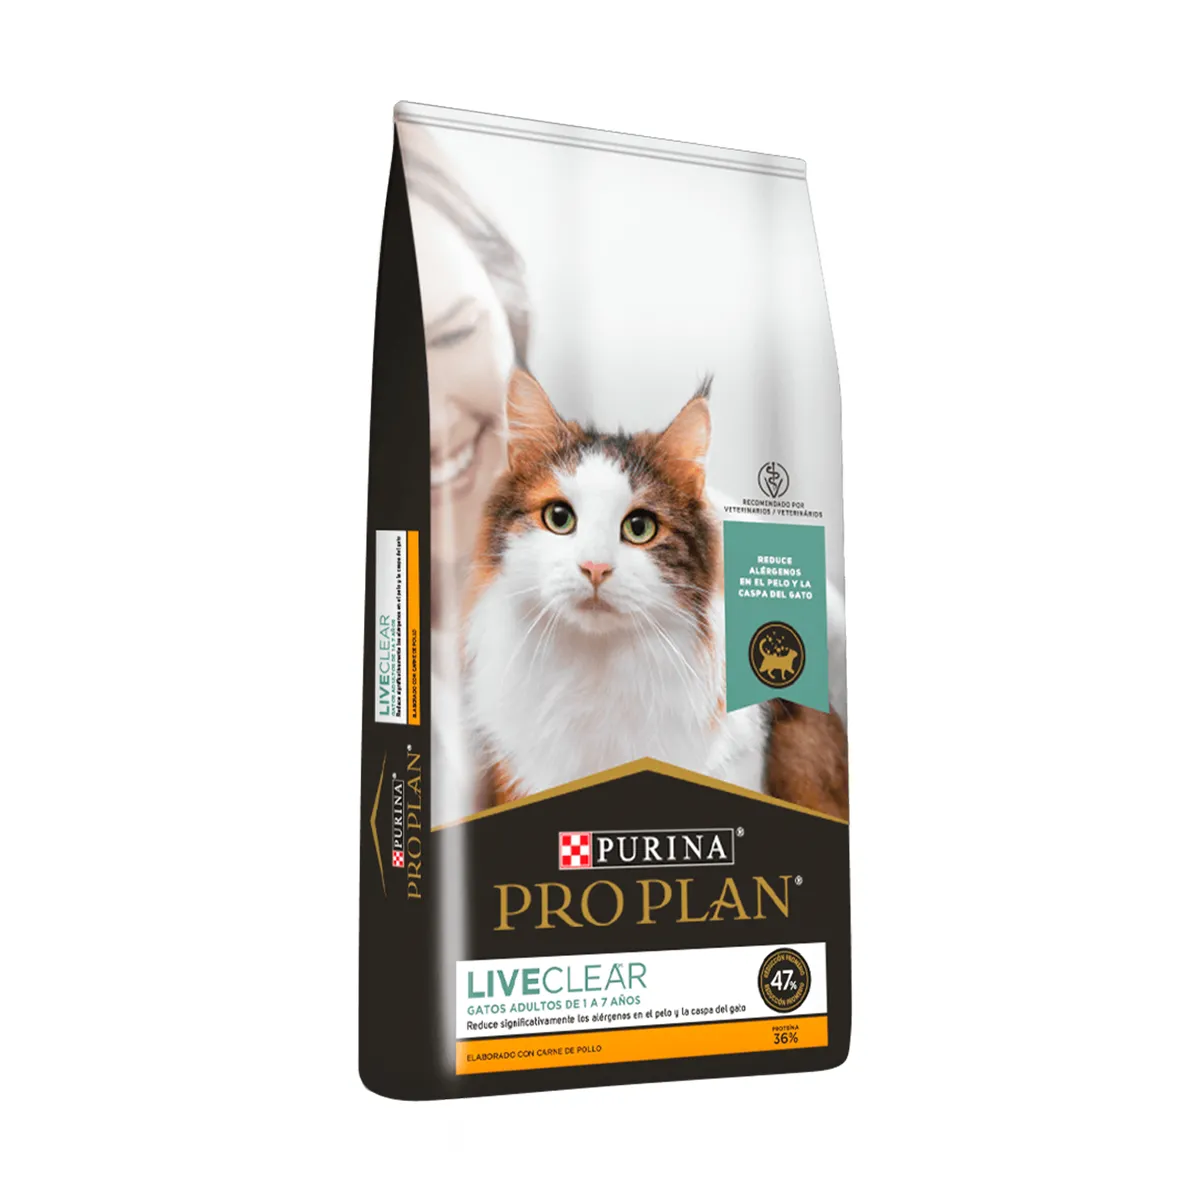 ProPlan-Liveclear-02